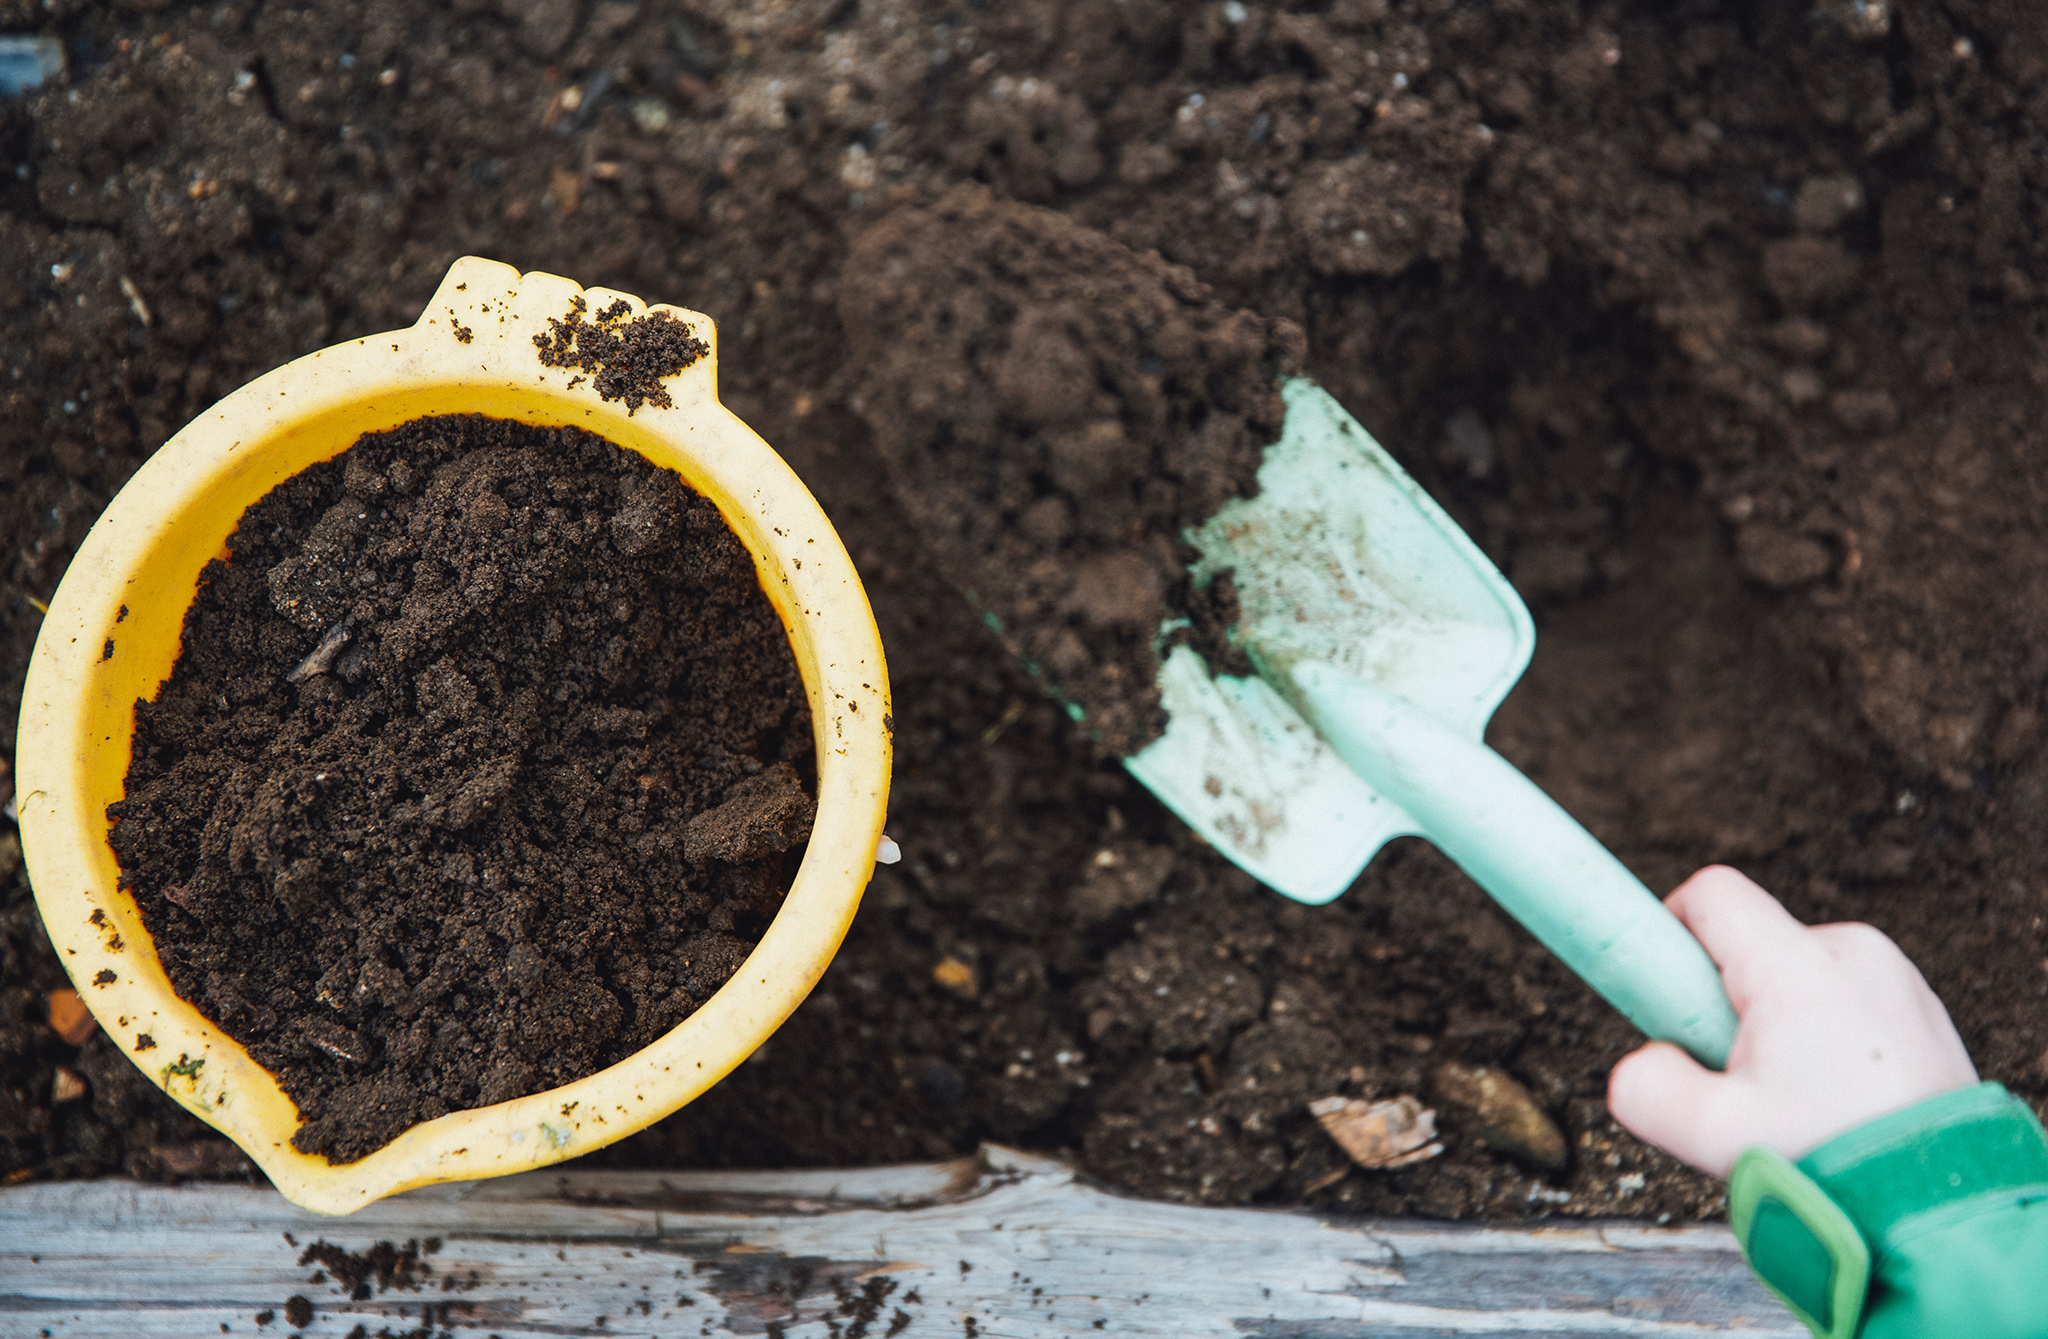 A hand spooning compost into a yellow bucket